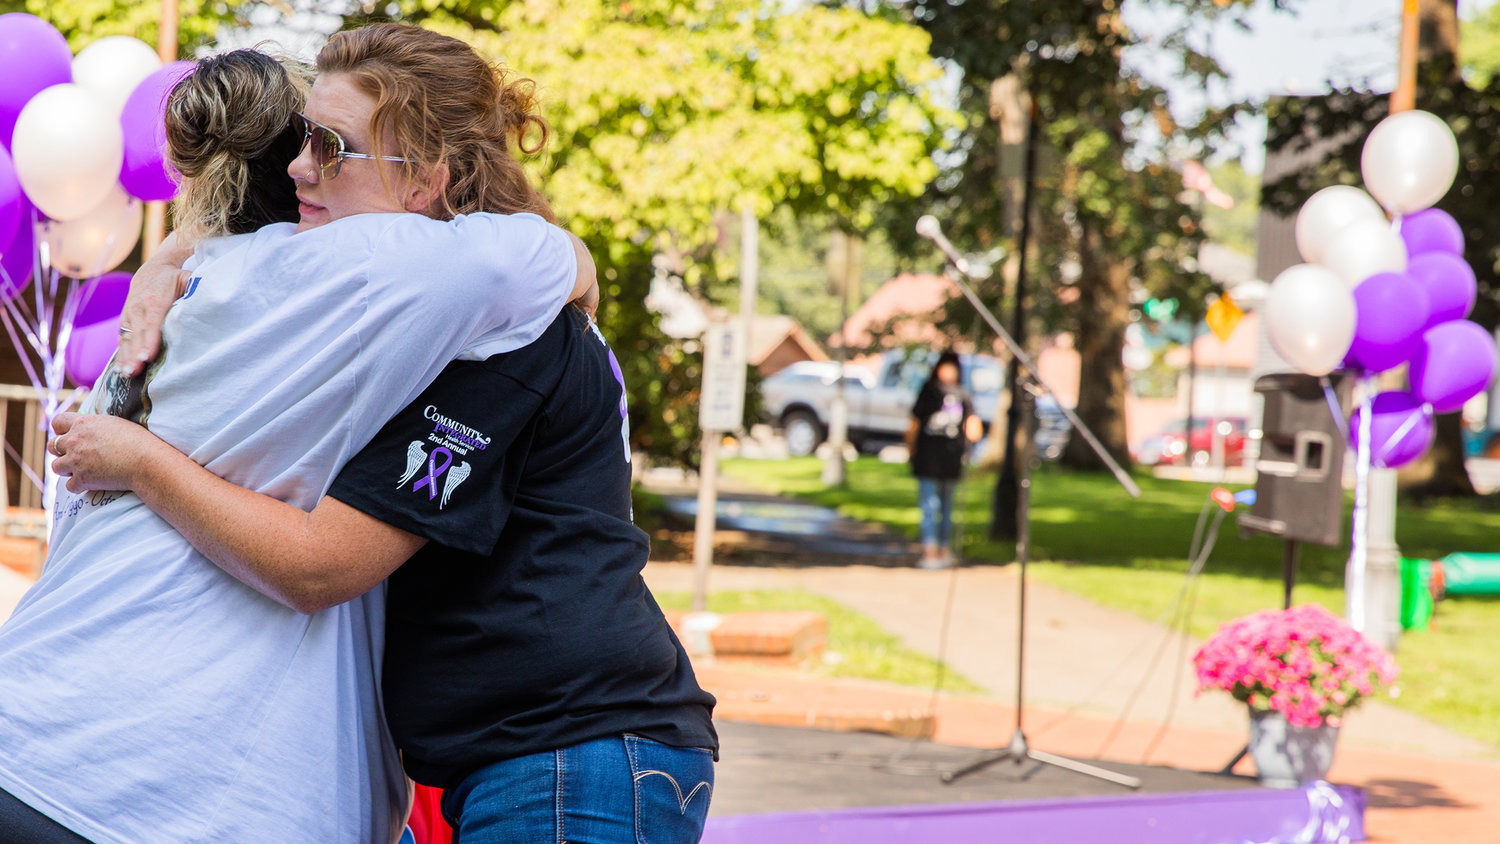 Crystal Aguilar receives an embrace at George Washington Park in Centralia during an overdose awareness event on Wednesday.